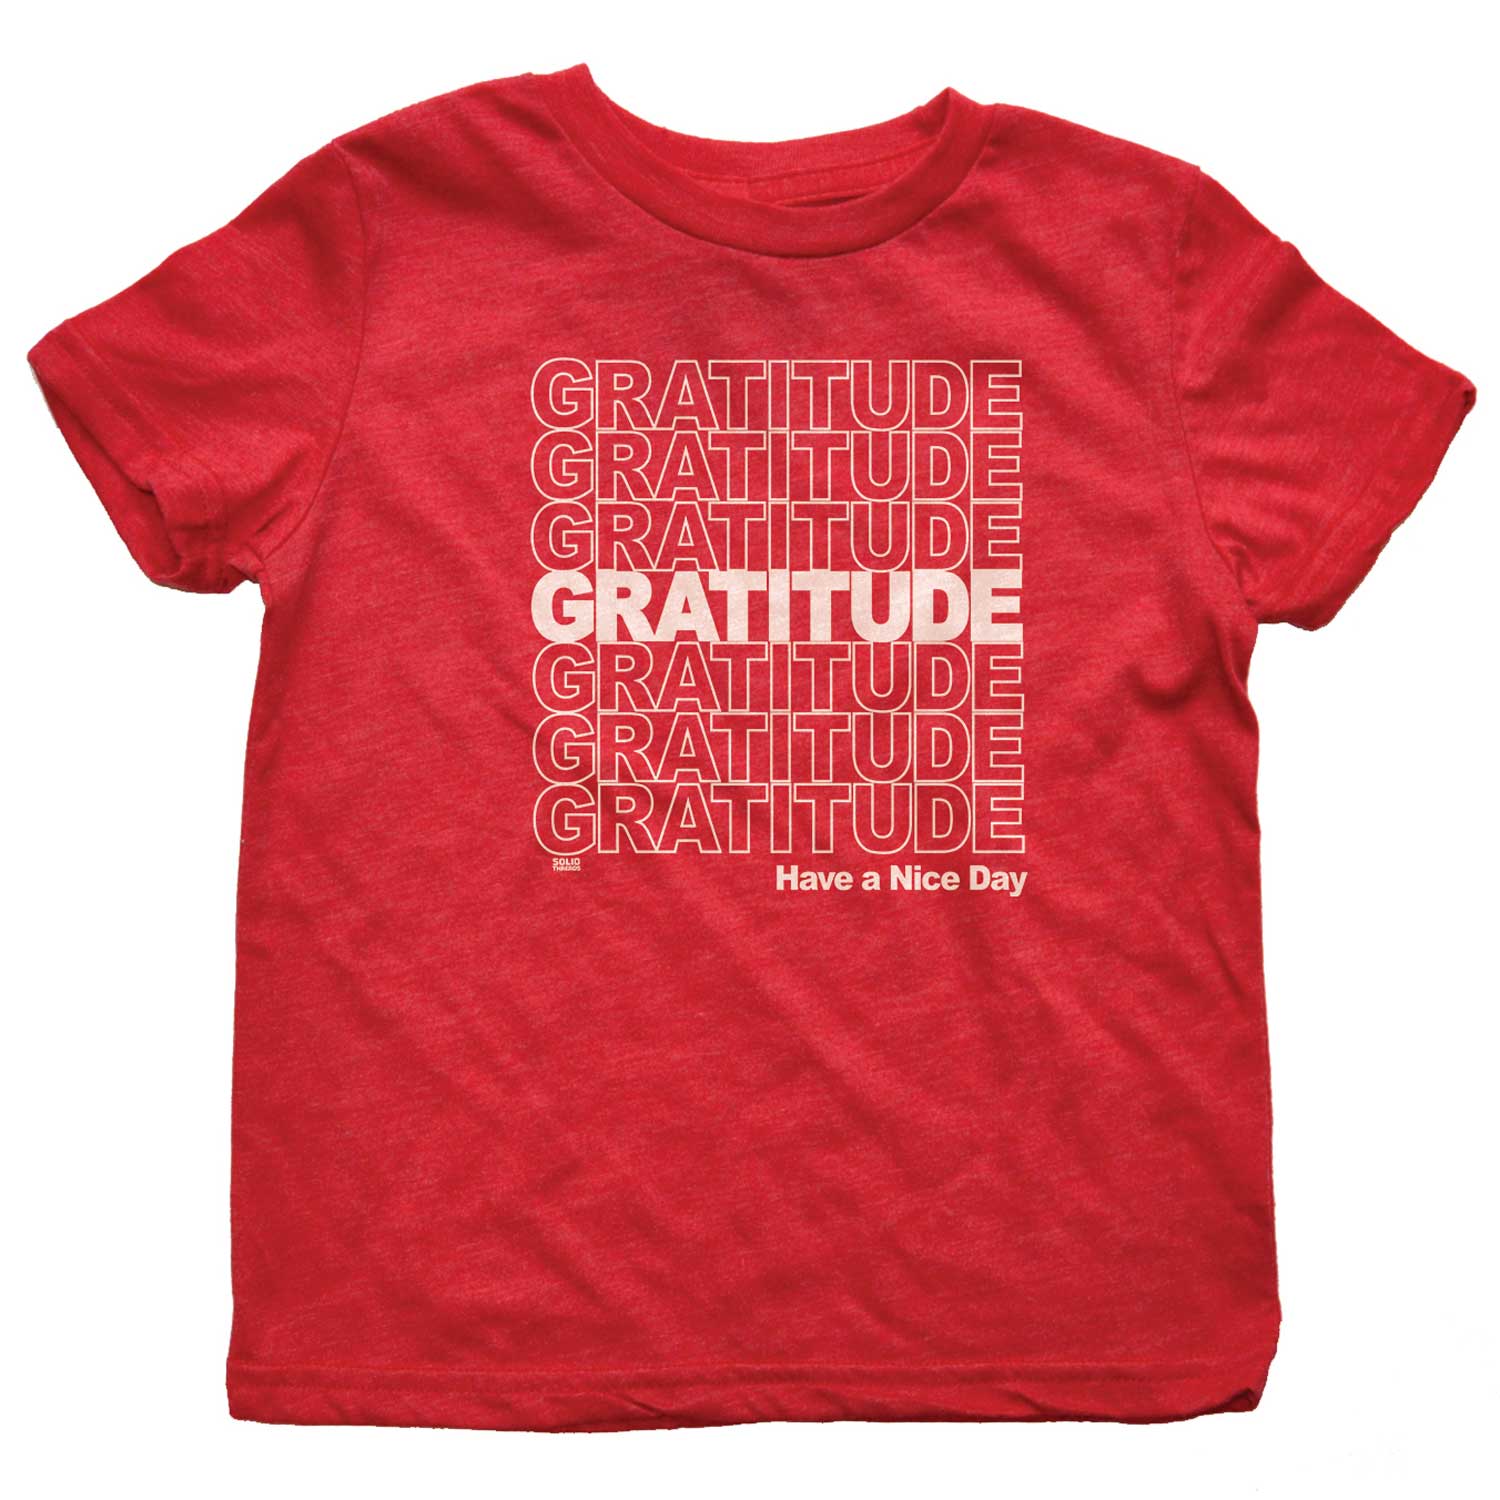 Retro Kid's Gratitude Wholesome Graphic Tee | Cute Have A Nice Day T-shirt for Youth | SOLID THREADS